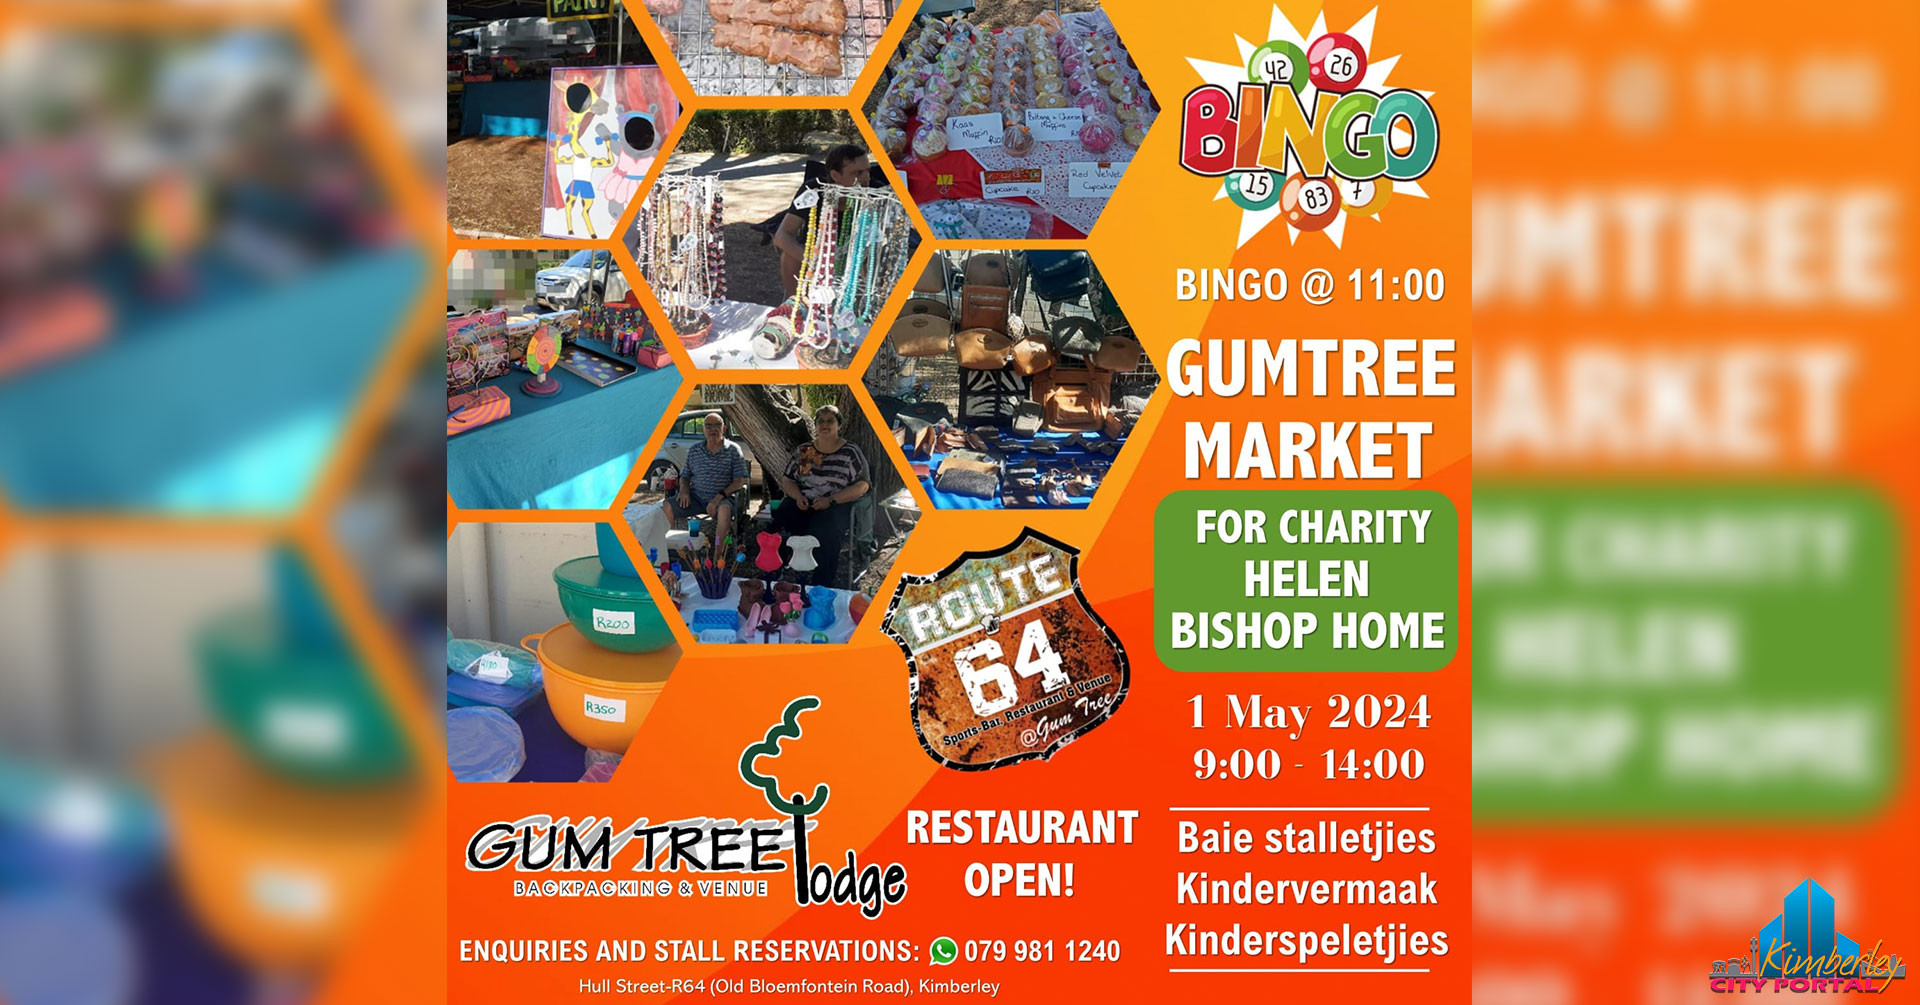 Gumtree Market for Charity